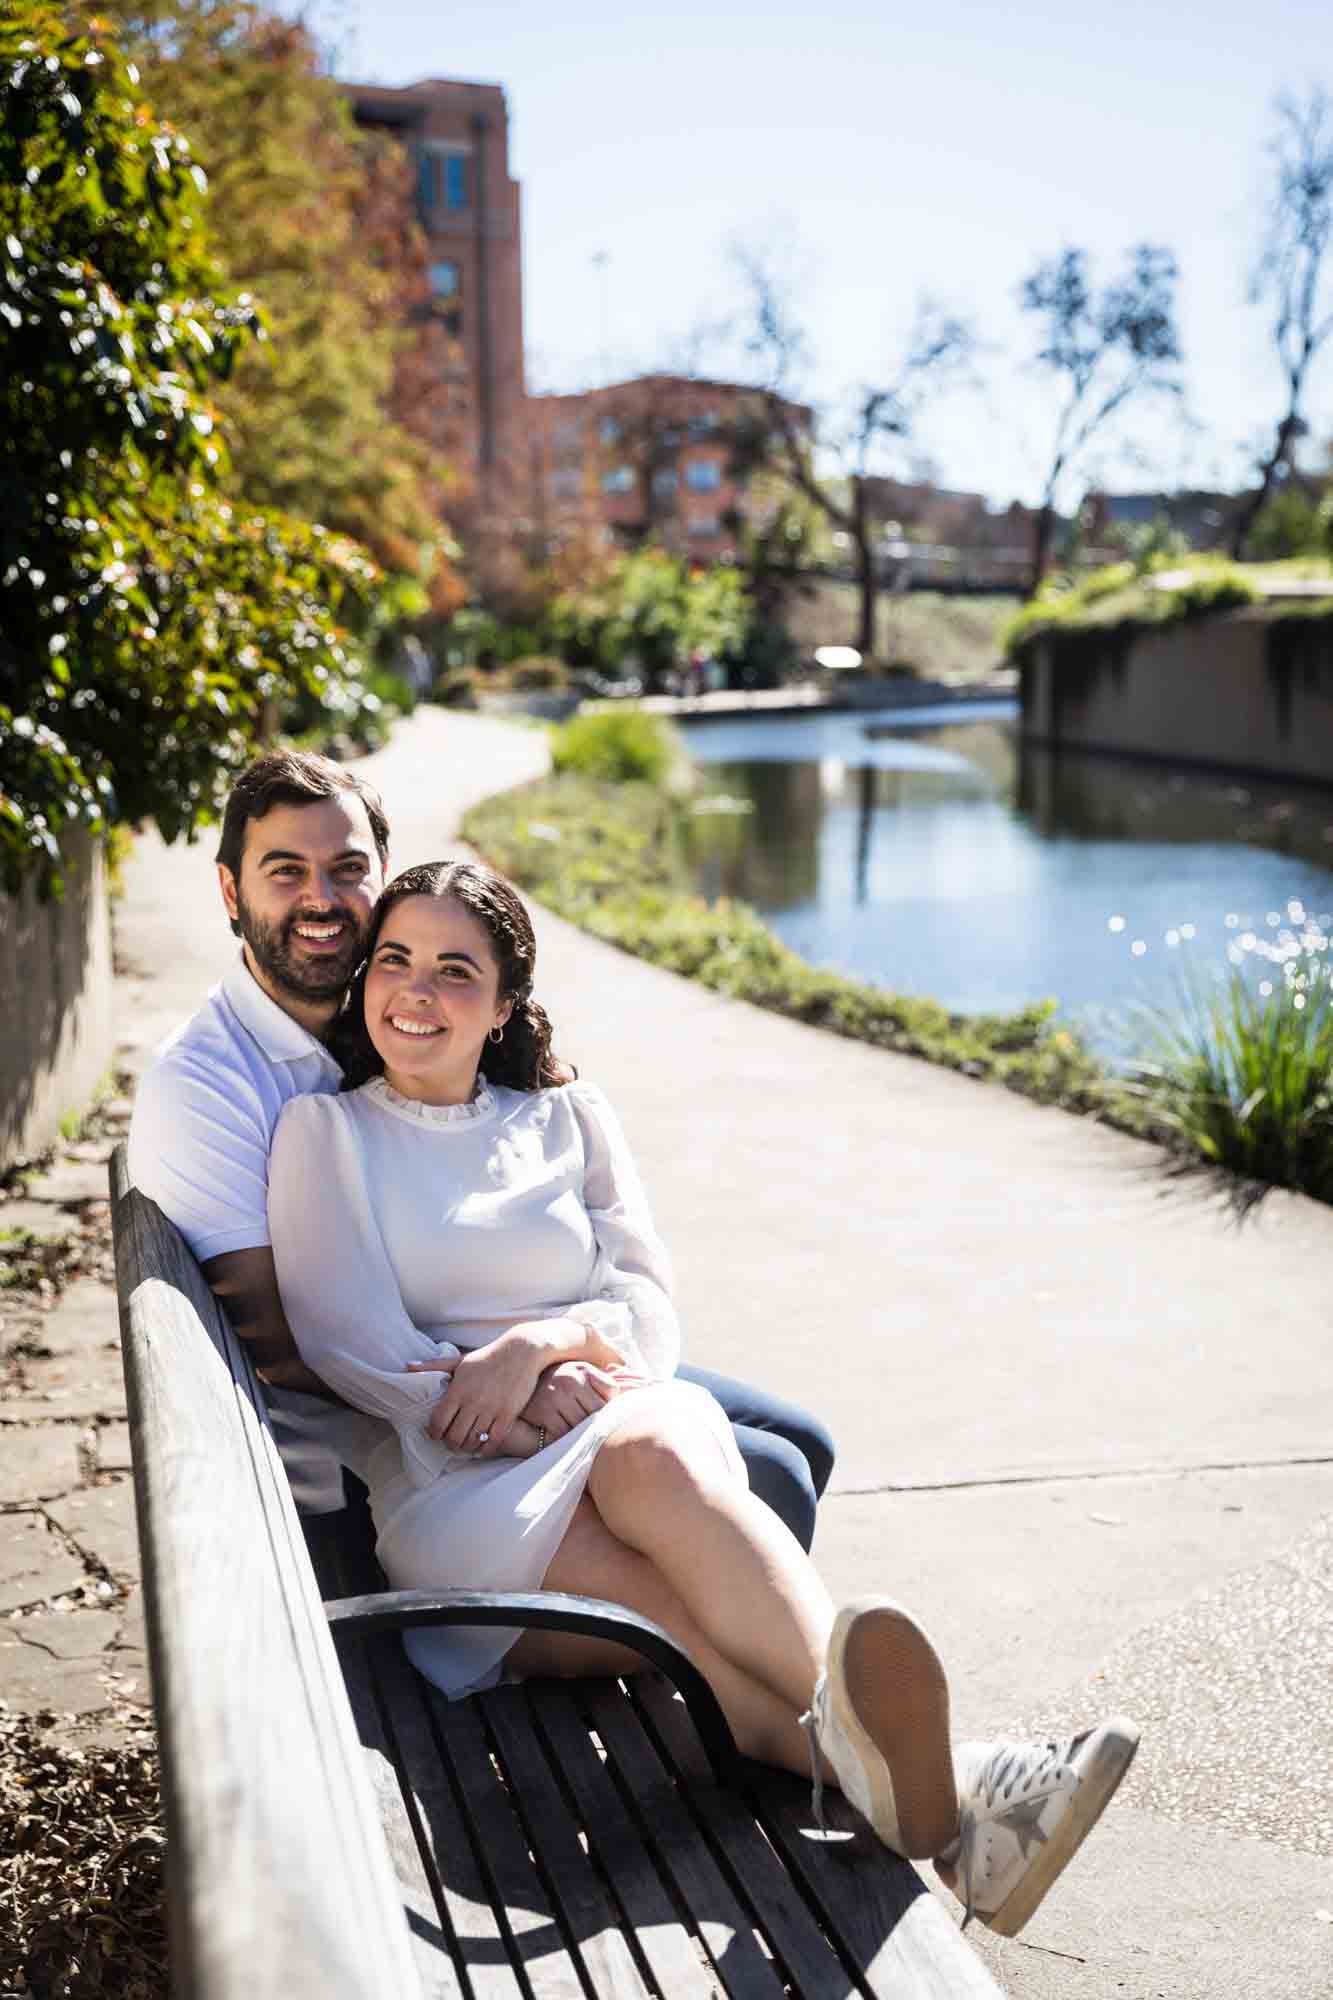 Couple hugging on bench by Riverwalk by San Antonio photographer, Kelly Williams